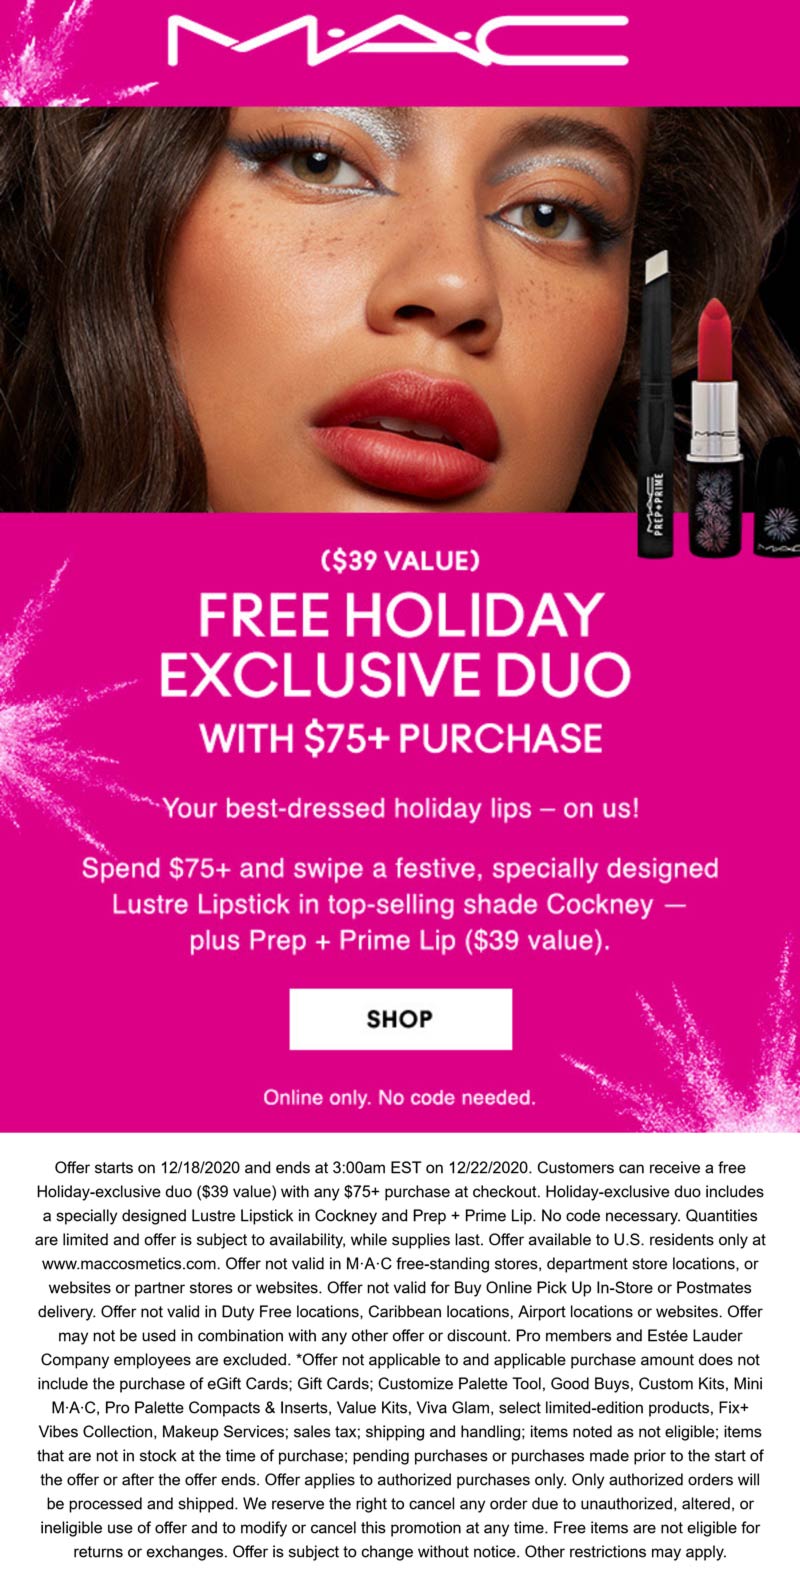 39 lipstick duo free with 75 spent online at MAC cosmetics mac The